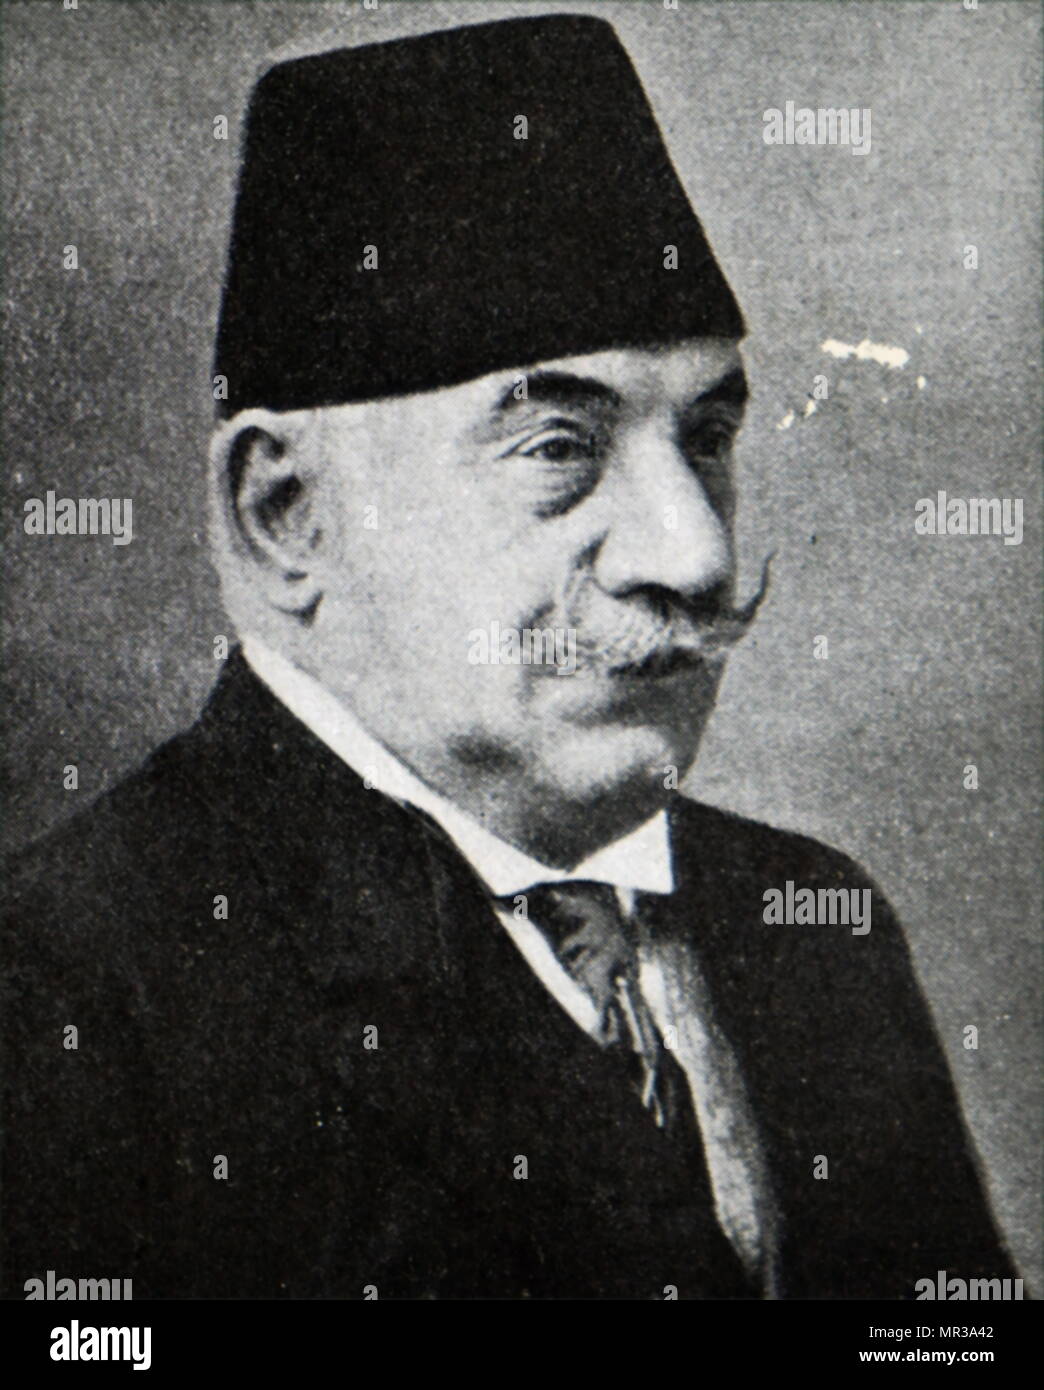 Photographic portrait of Nazım Pasha (1848-1913) a Turkish Chief of Staff of the military of the Ottoman Empire during the First Balkan War of 1912-1913. Dated 20th century Stock Photo